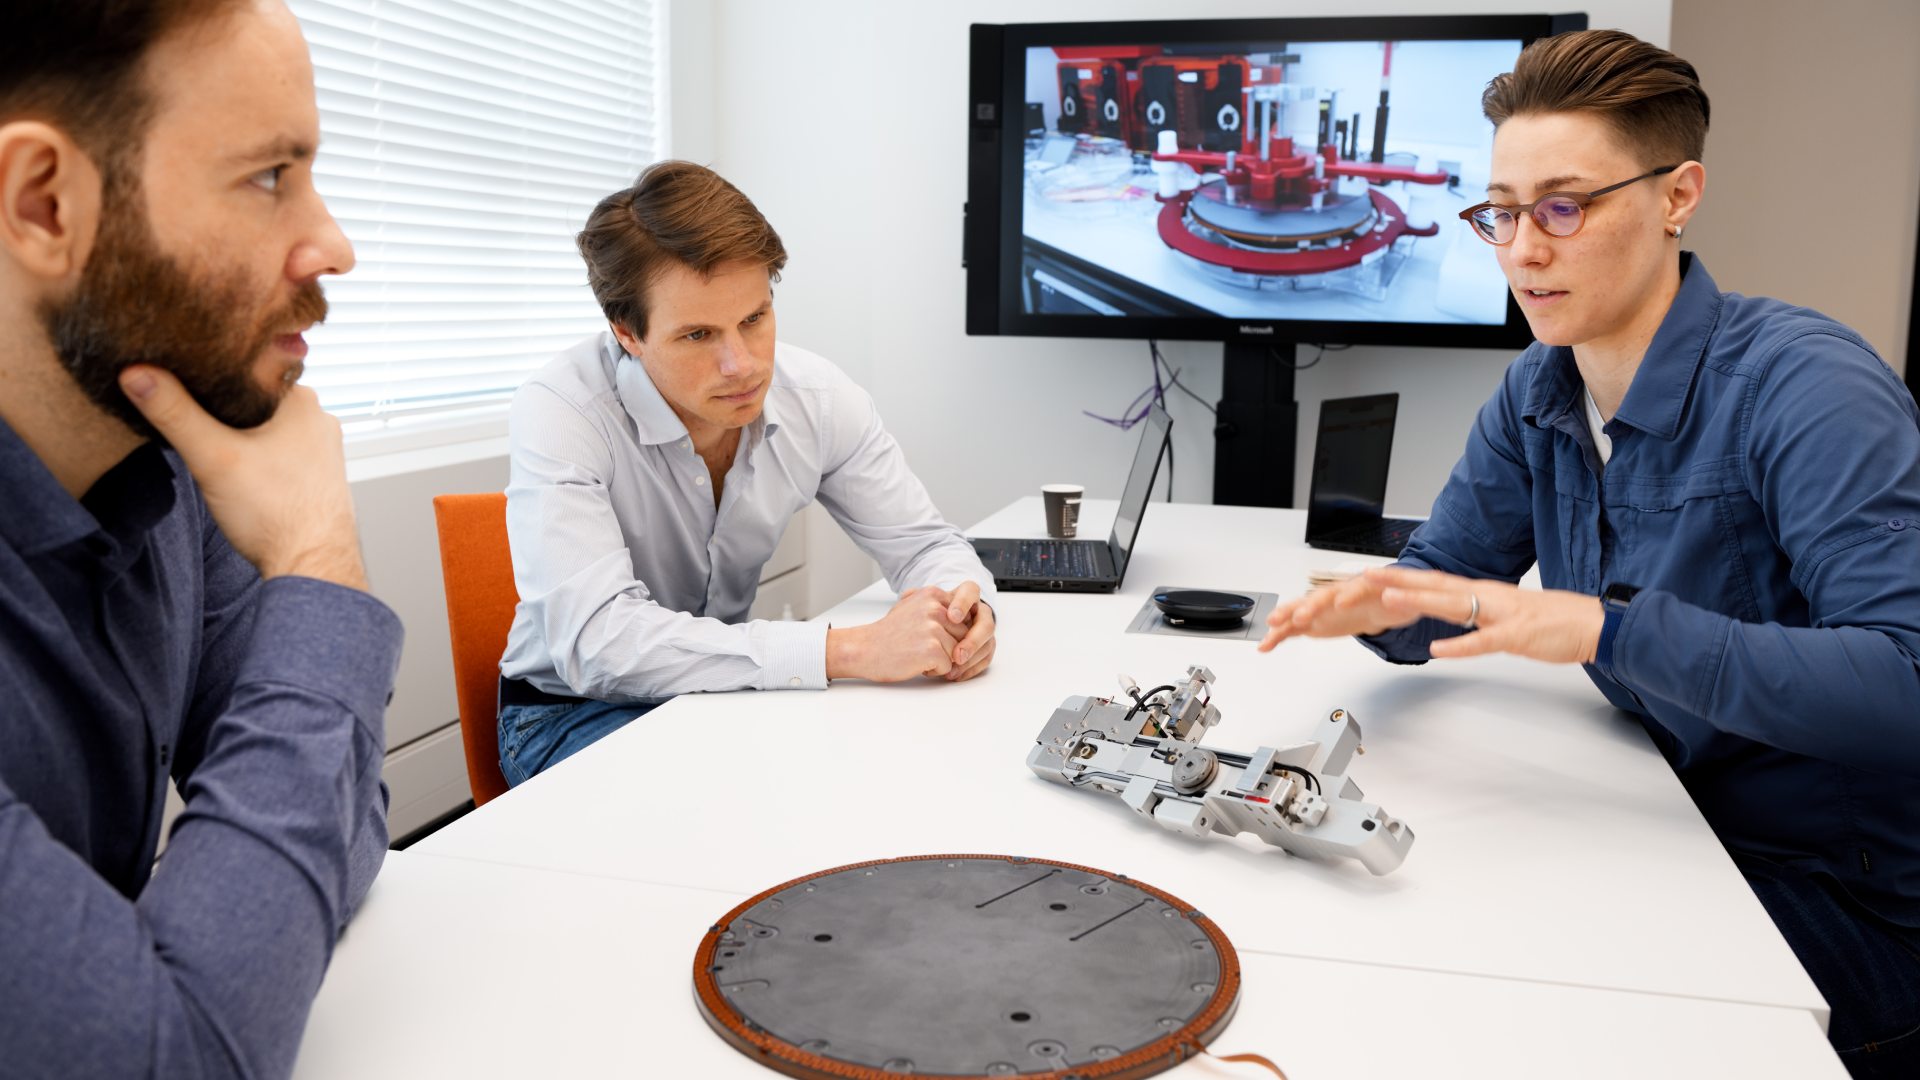 Three ASML employees examine a piece of machinery in a meeting room, a computer screen in the background. 